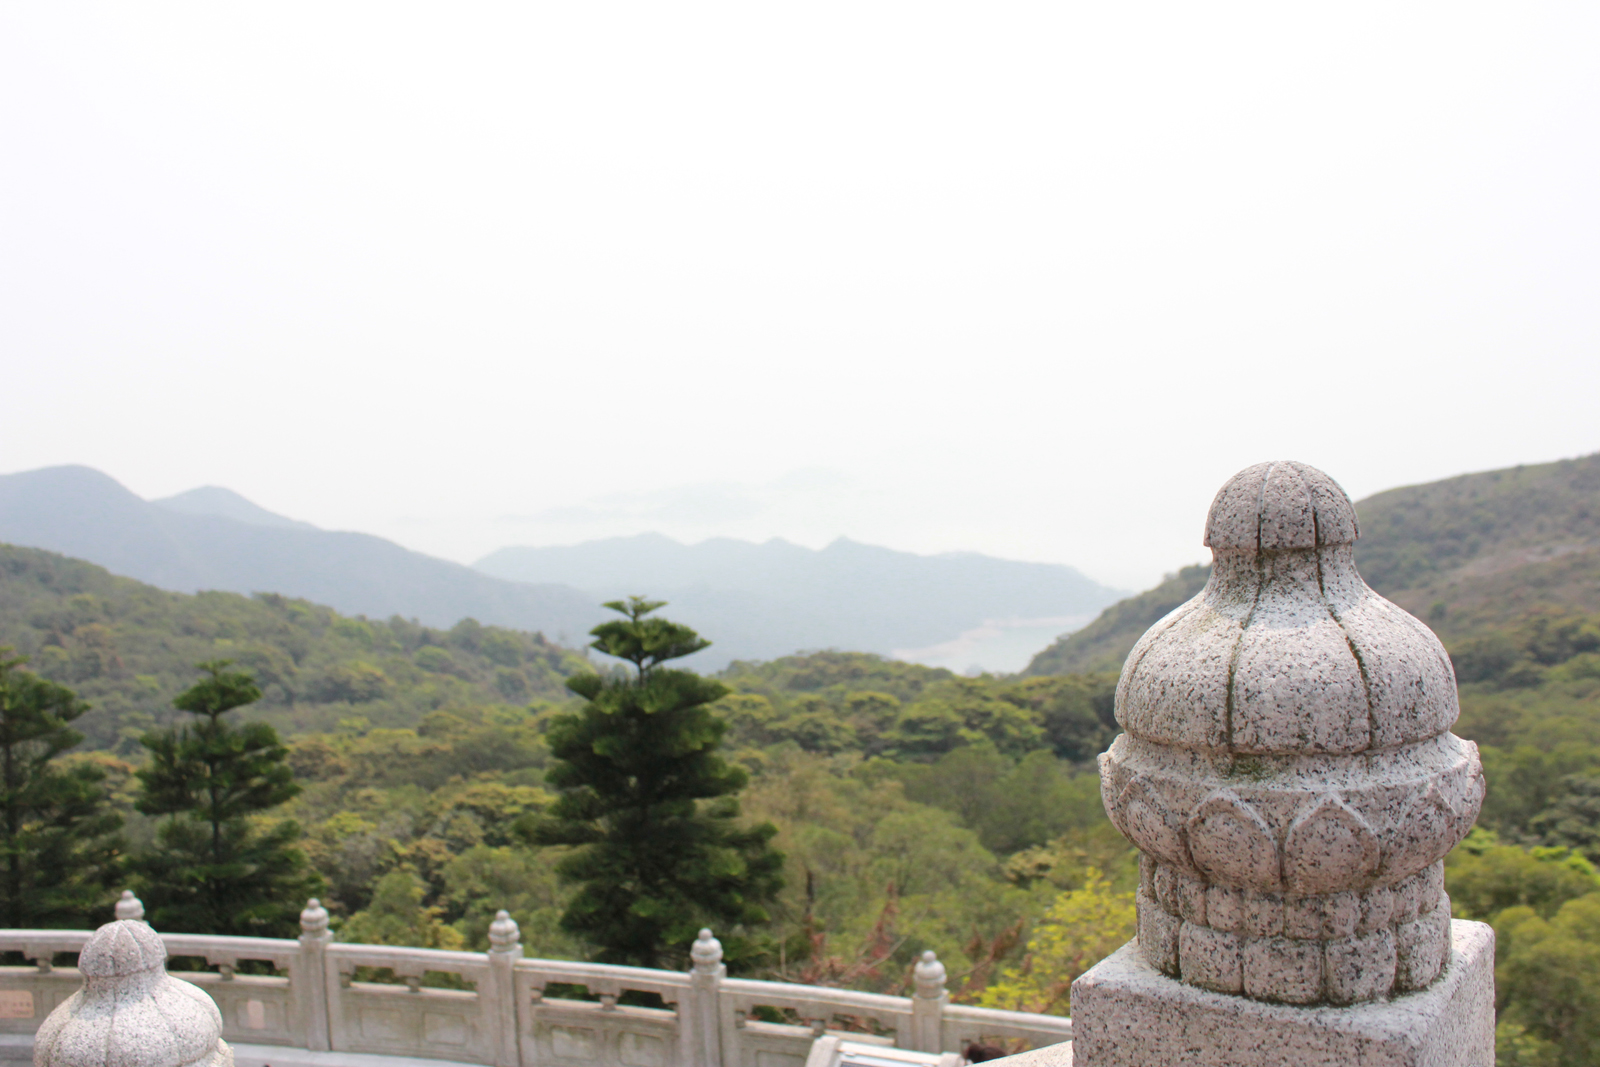 This was taken from the side of the Buddha looking out into the open. Doesn't it look so serene?